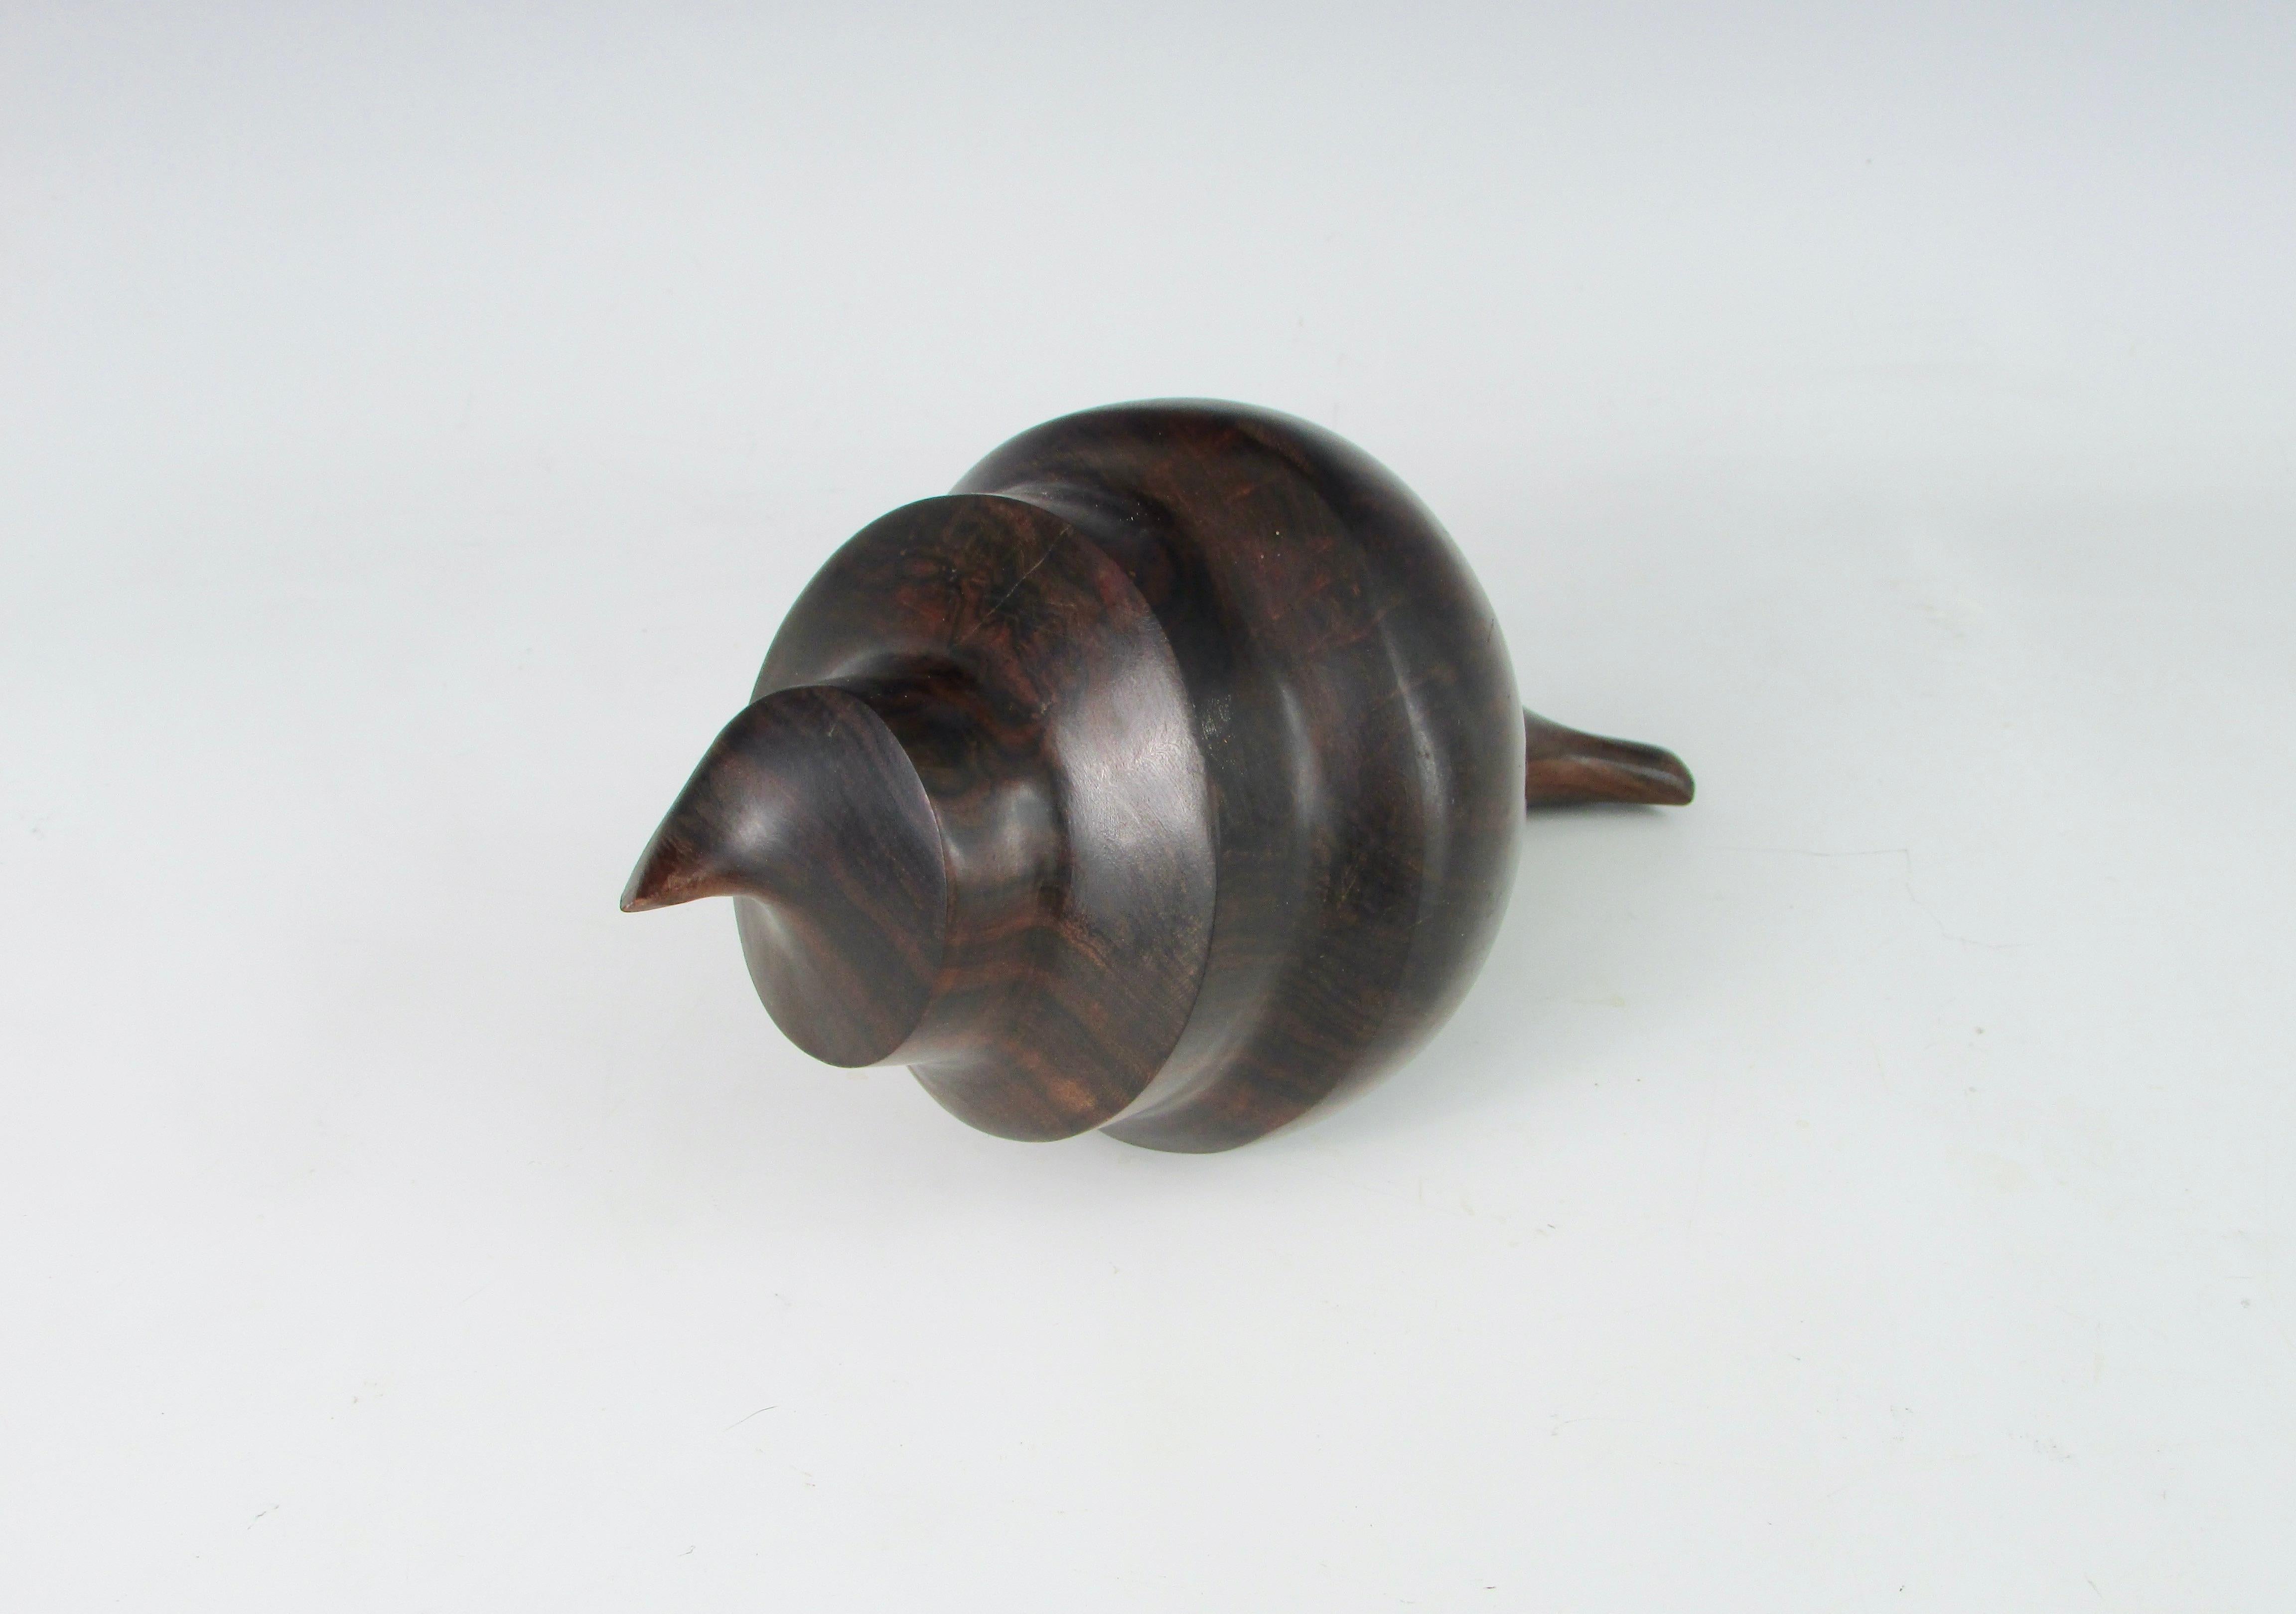 Solid piece of rosewood carved and finished smooth in the shape of a conch shell. Fine display as desk top sculpture or paperweight.